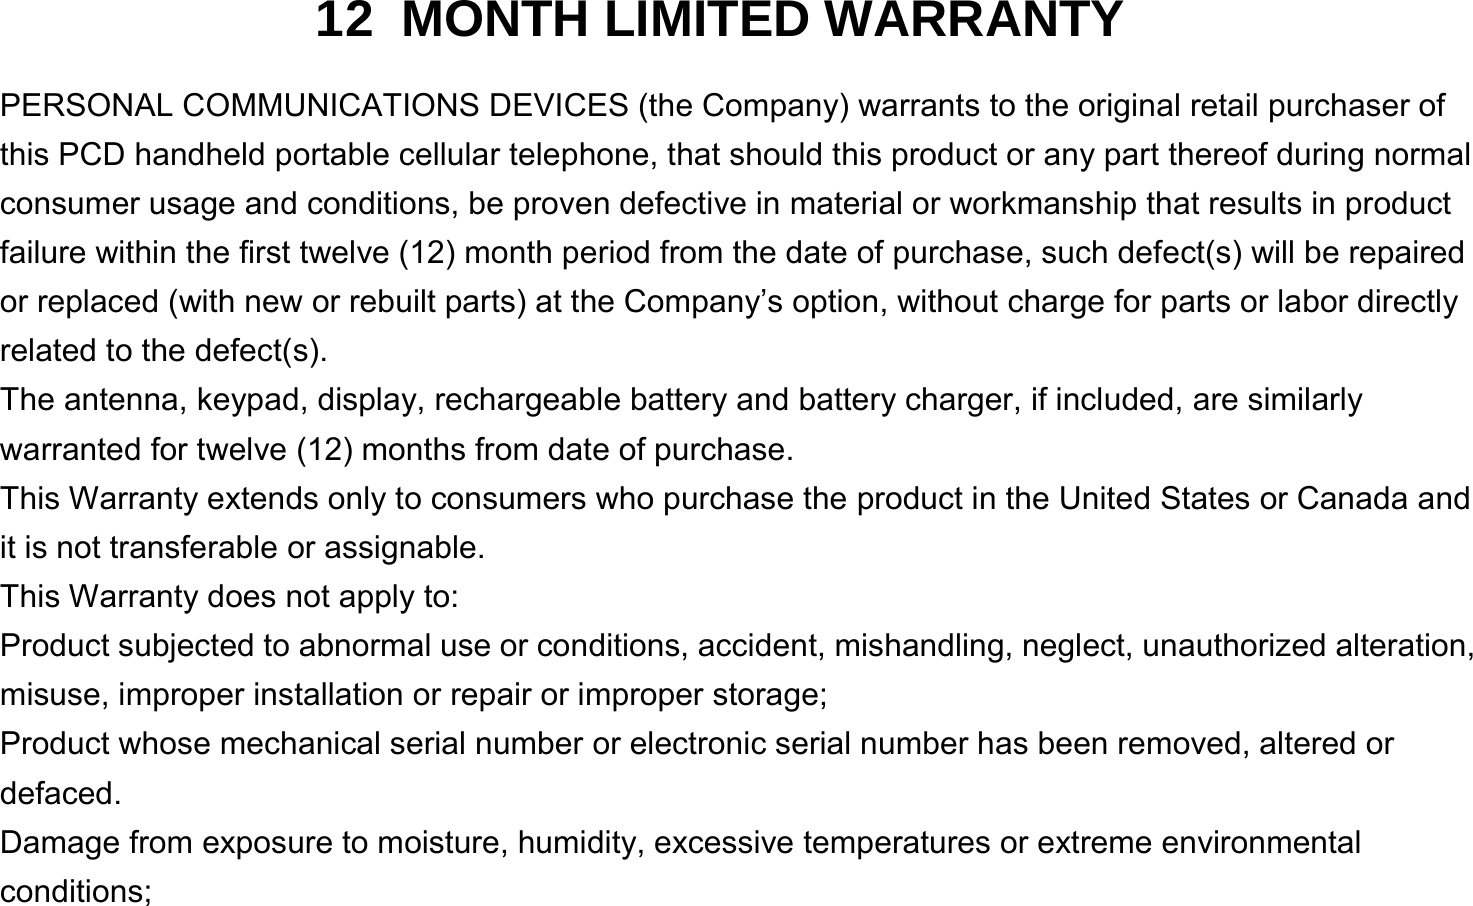  12 MONTH LIMITED WARRANTY PERSONAL COMMUNICATIONS DEVICES (the Company) warrants to the original retail purchaser of this PCD handheld portable cellular telephone, that should this product or any part thereof during normal consumer usage and conditions, be proven defective in material or workmanship that results in product failure within the first twelve (12) month period from the date of purchase, such defect(s) will be repaired or replaced (with new or rebuilt parts) at the Company’s option, without charge for parts or labor directly related to the defect(s). The antenna, keypad, display, rechargeable battery and battery charger, if included, are similarly warranted for twelve (12) months from date of purchase.     This Warranty extends only to consumers who purchase the product in the United States or Canada and it is not transferable or assignable. This Warranty does not apply to: Product subjected to abnormal use or conditions, accident, mishandling, neglect, unauthorized alteration, misuse, improper installation or repair or improper storage; Product whose mechanical serial number or electronic serial number has been removed, altered or defaced. Damage from exposure to moisture, humidity, excessive temperatures or extreme environmental conditions; 